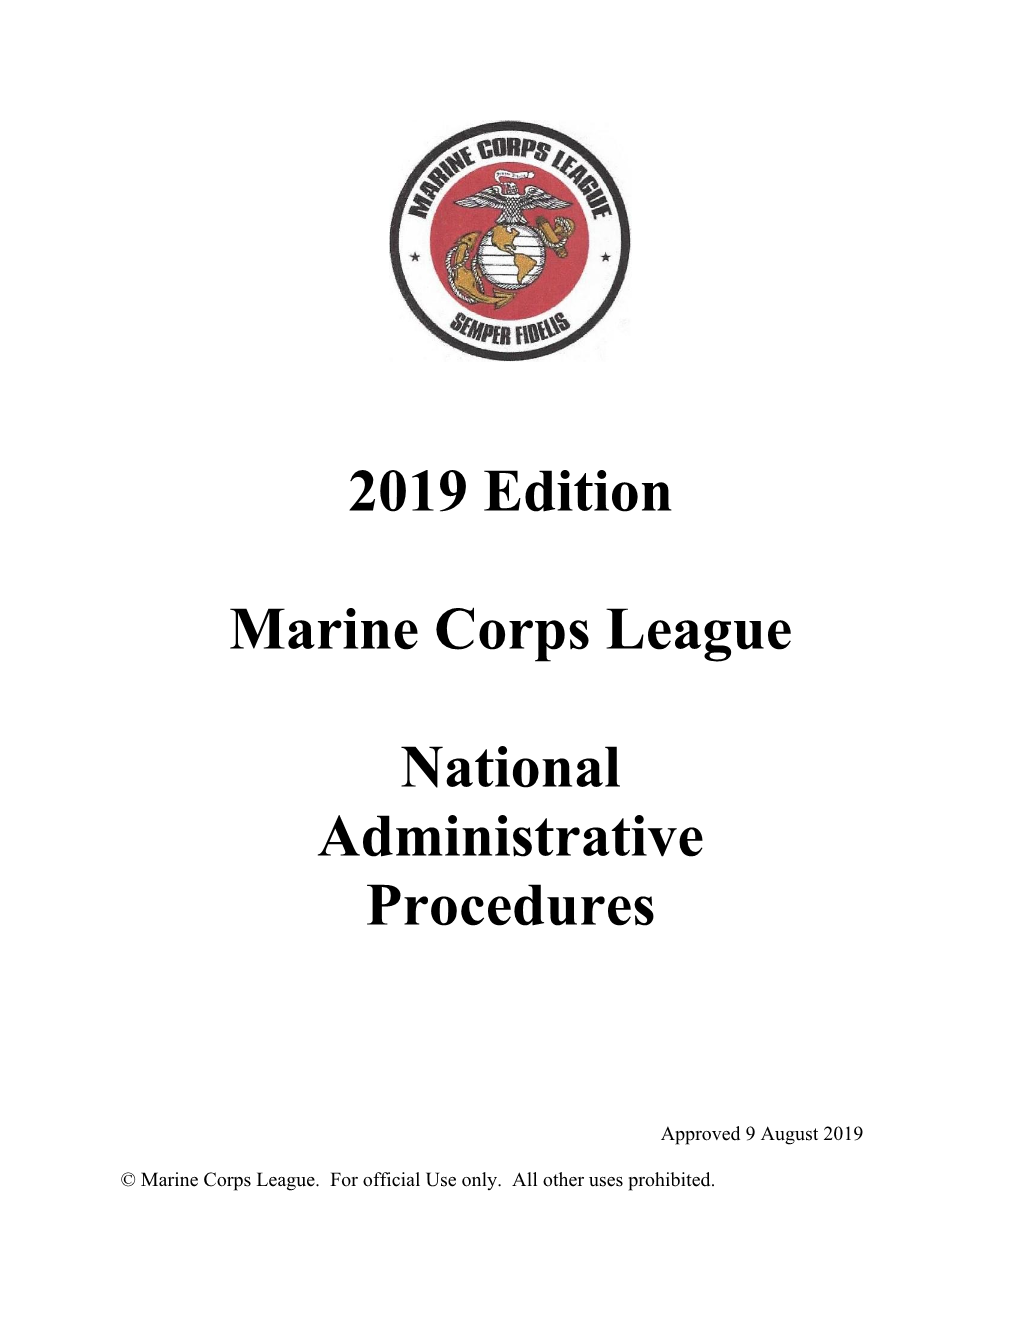 2019 Edition Marine Corps League National Administrative Procedures